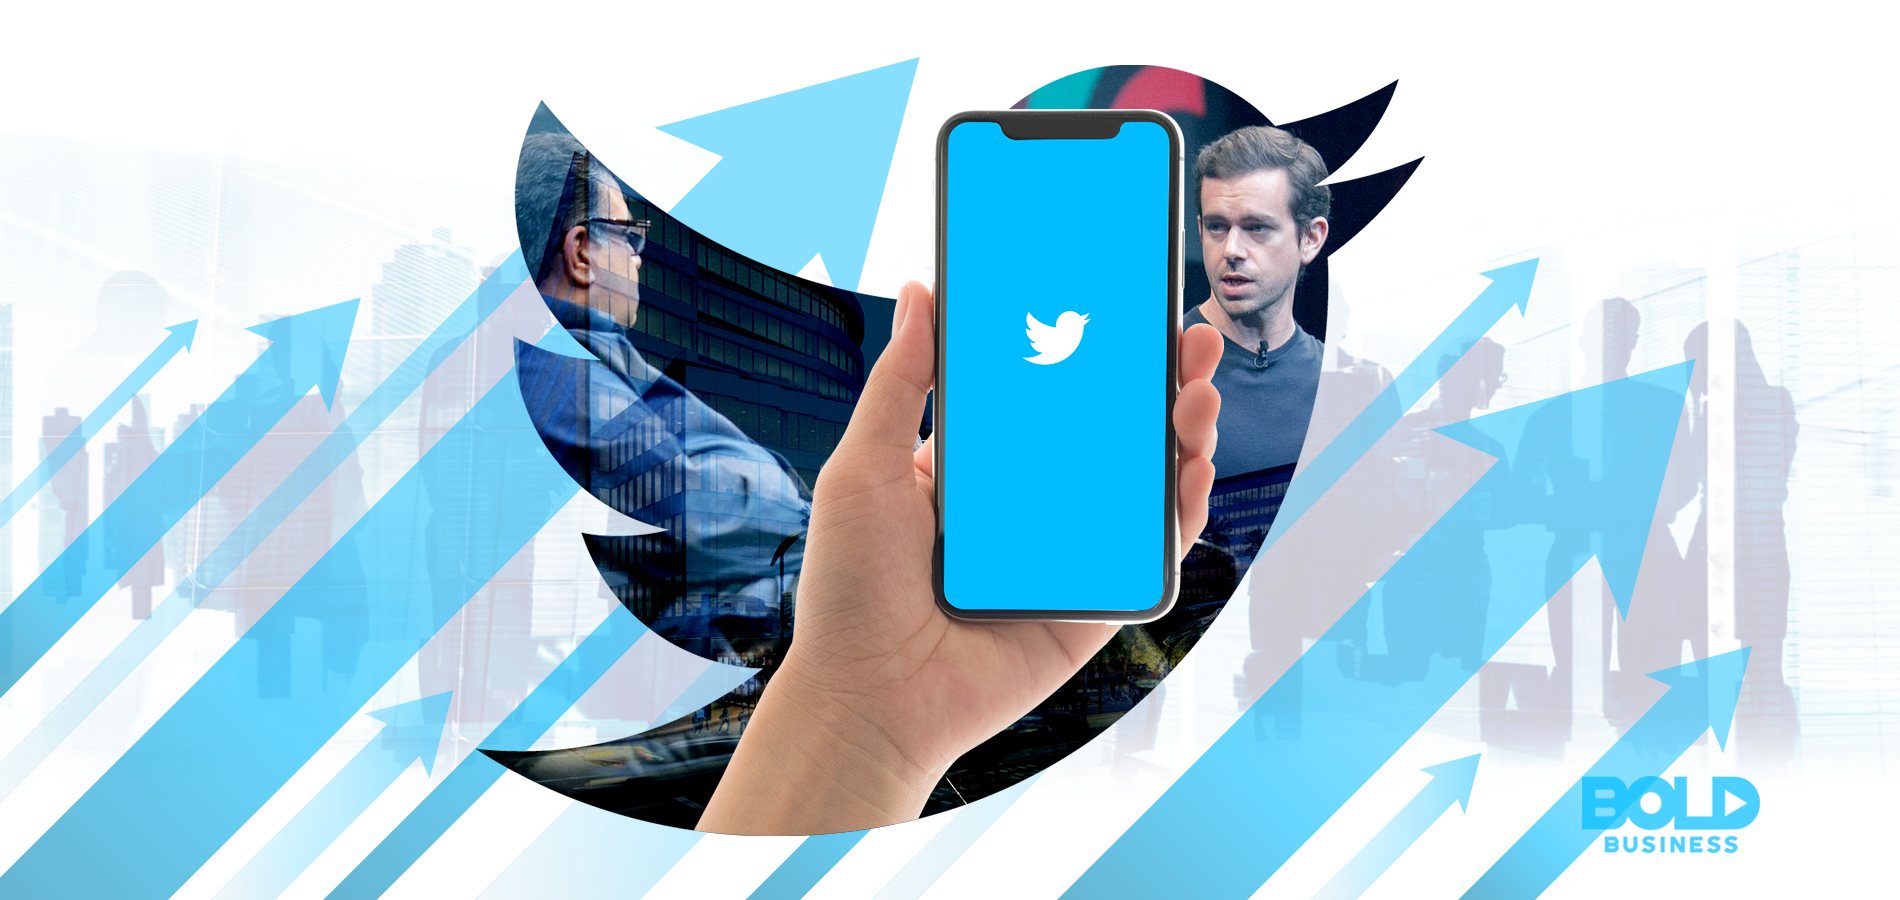 Twitter’s Changing Direction–How are the Changes Impacting Twitter’s Revenue?